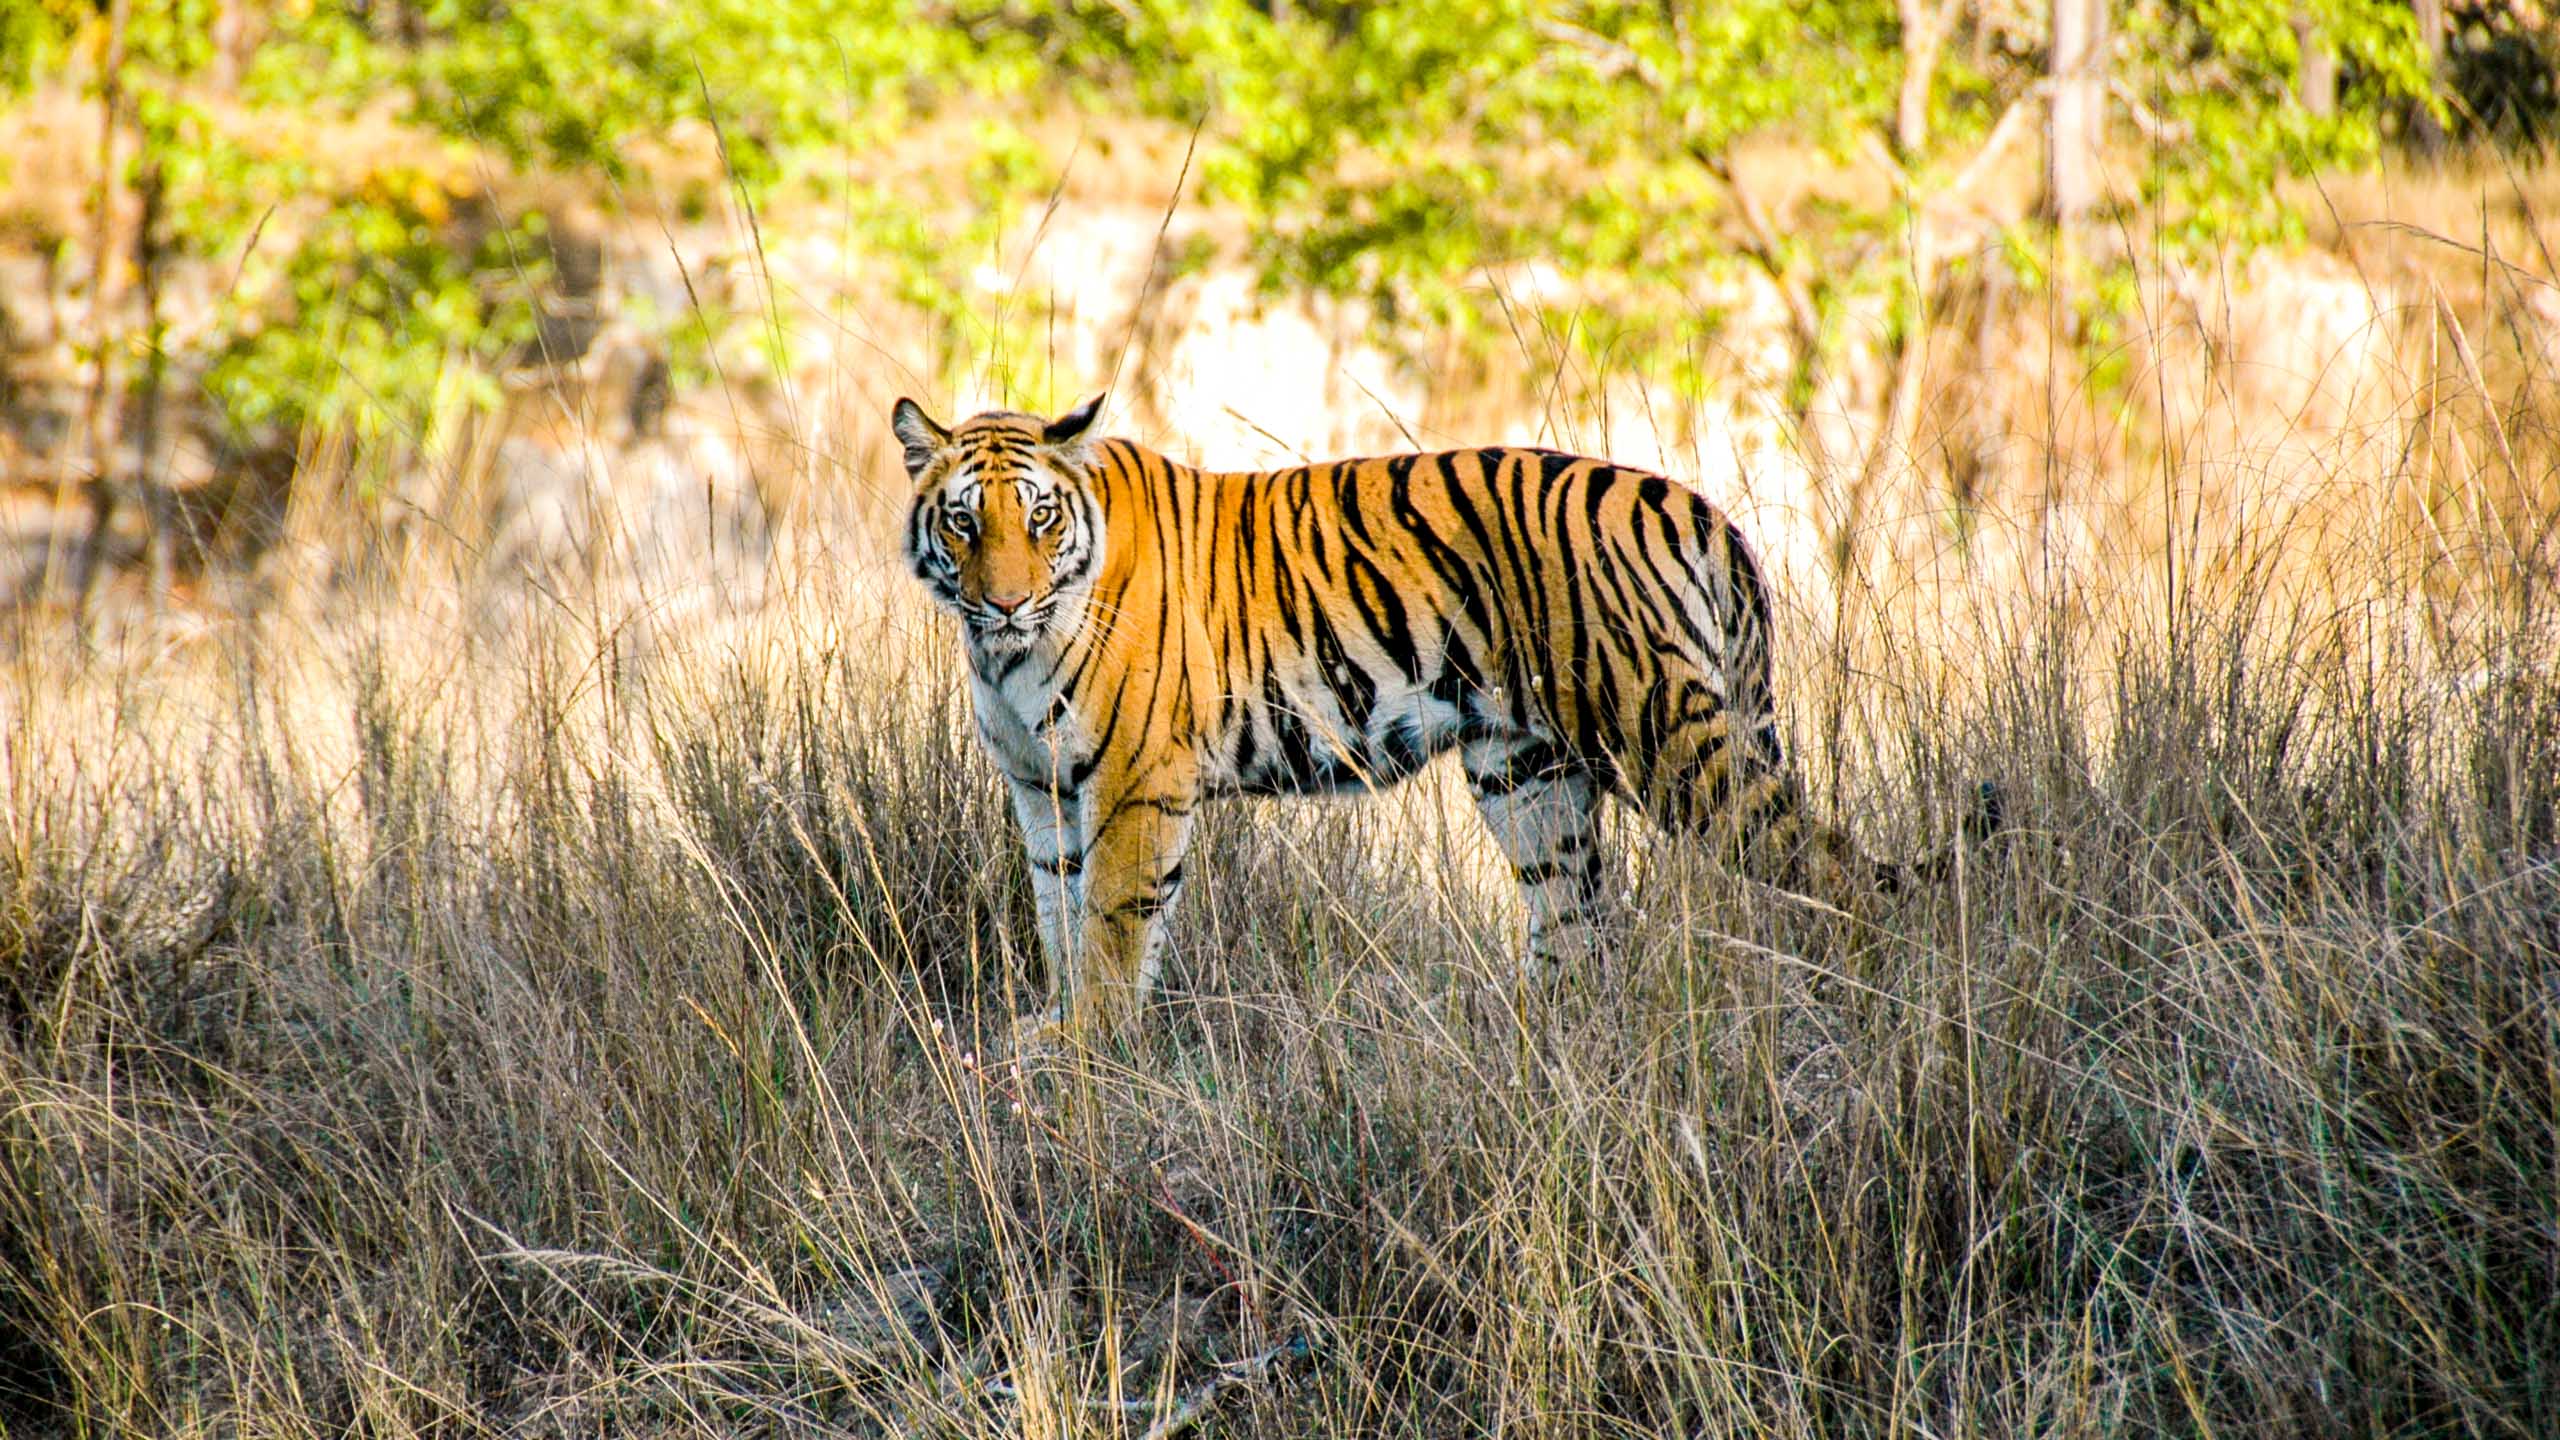 Indian tiger stands in grass